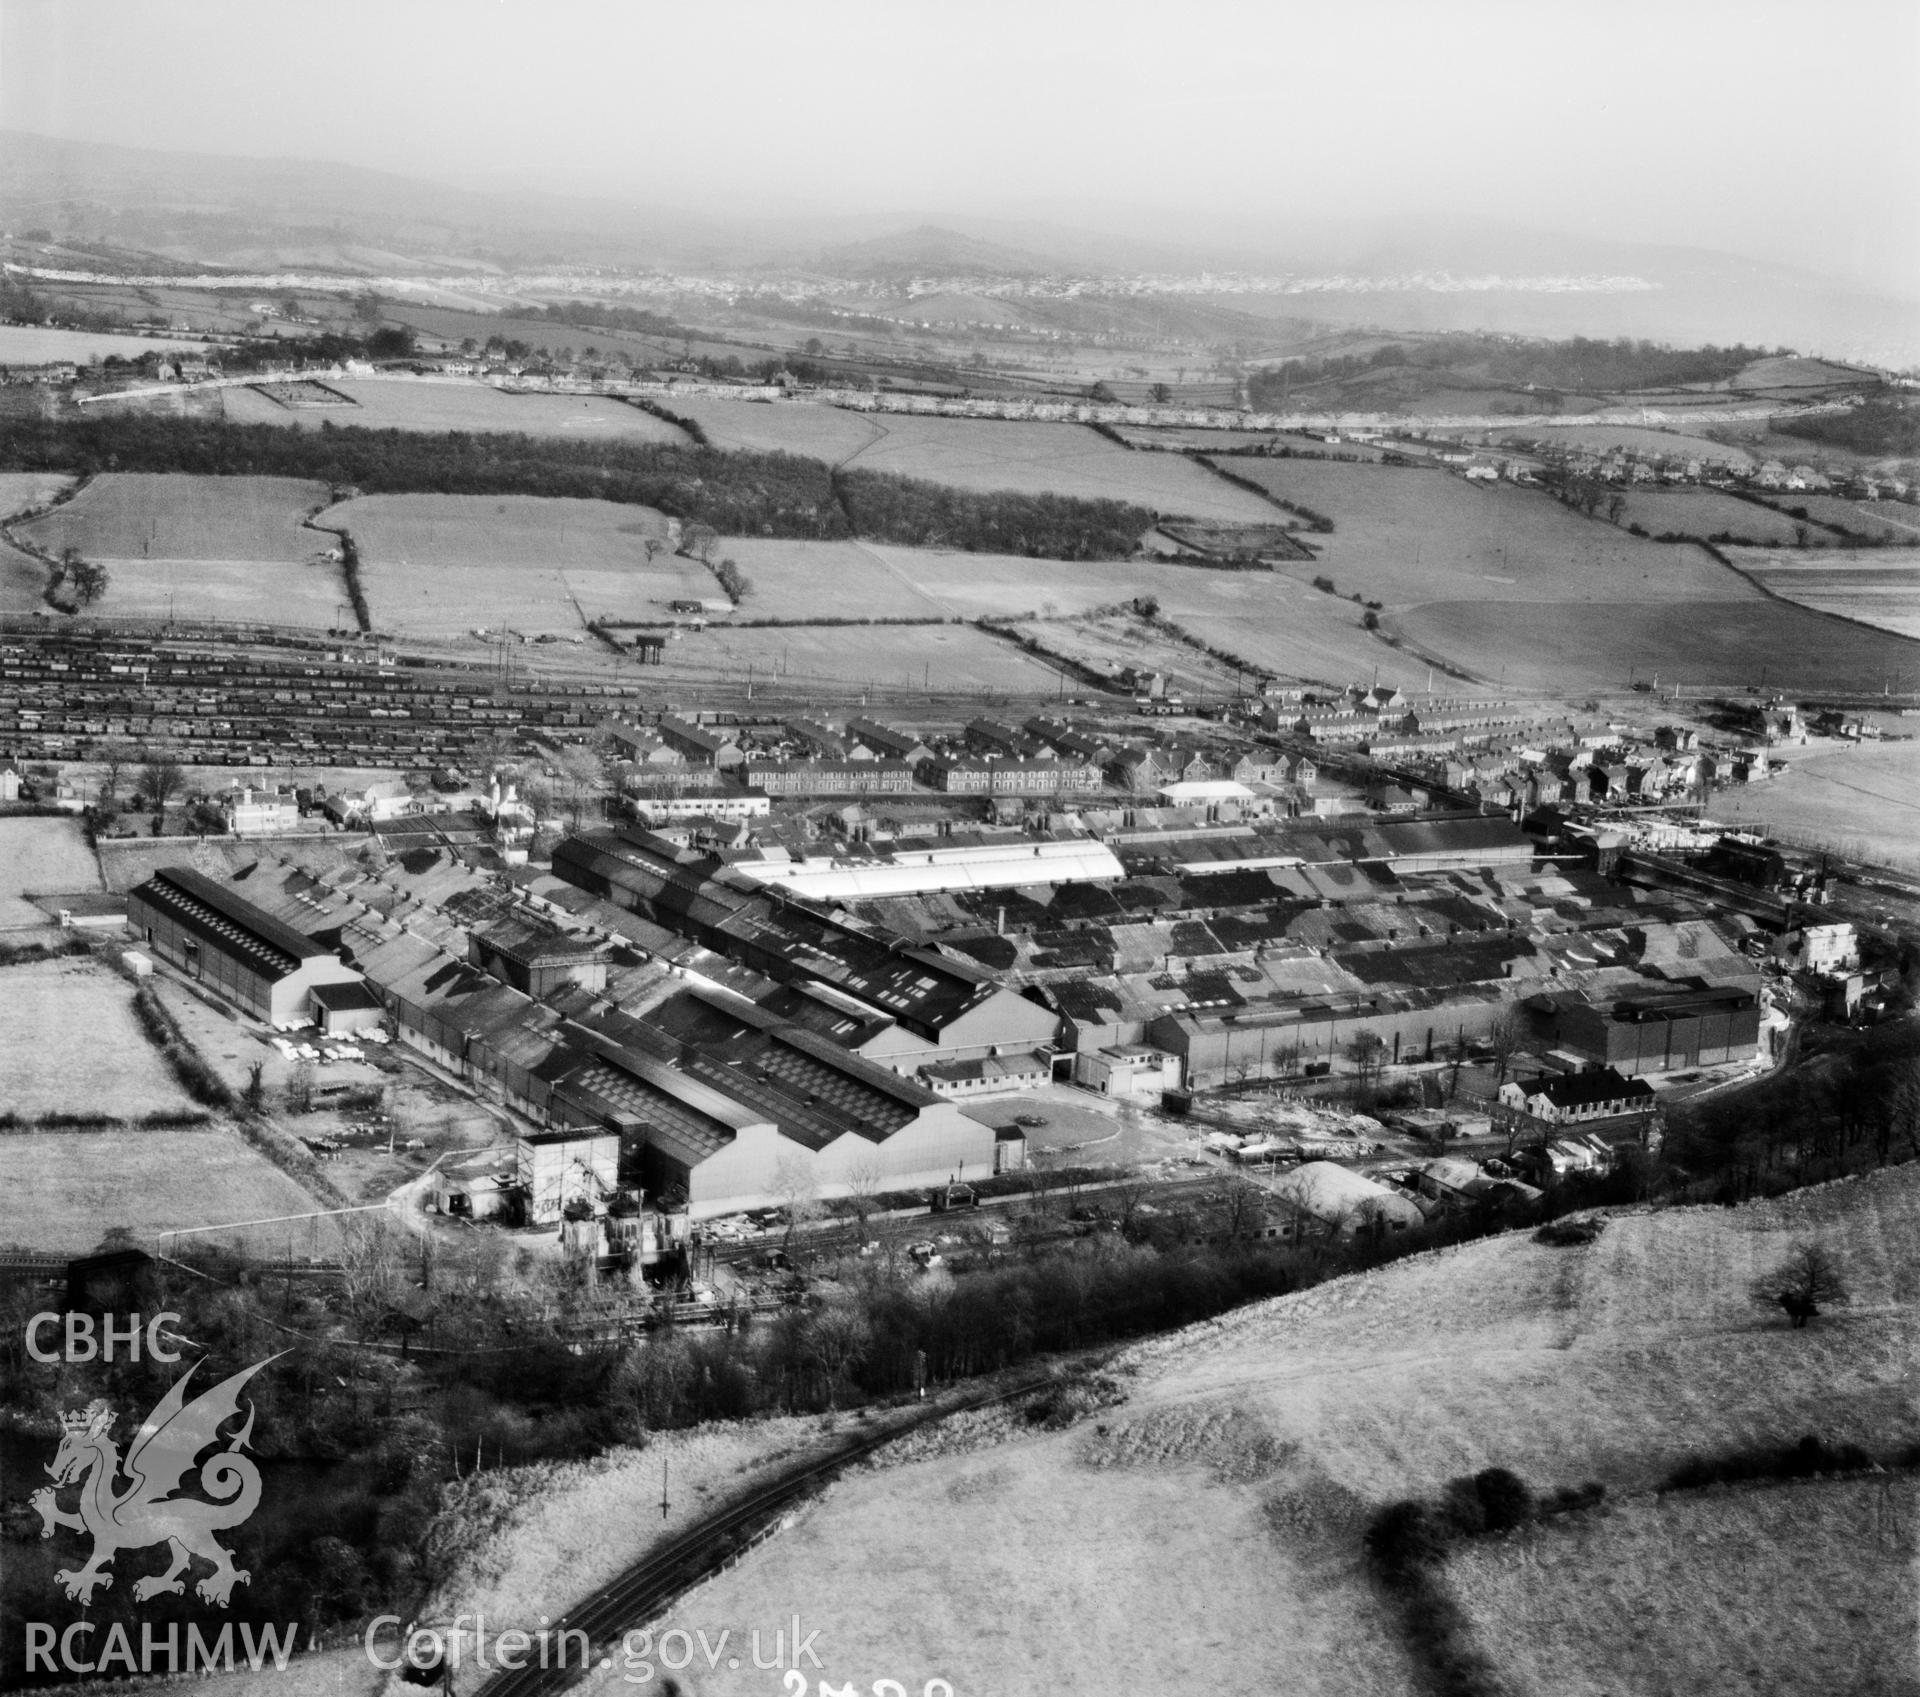 View of Northern Aluminium Company works, Rogerstone, showing camoflaged roofs